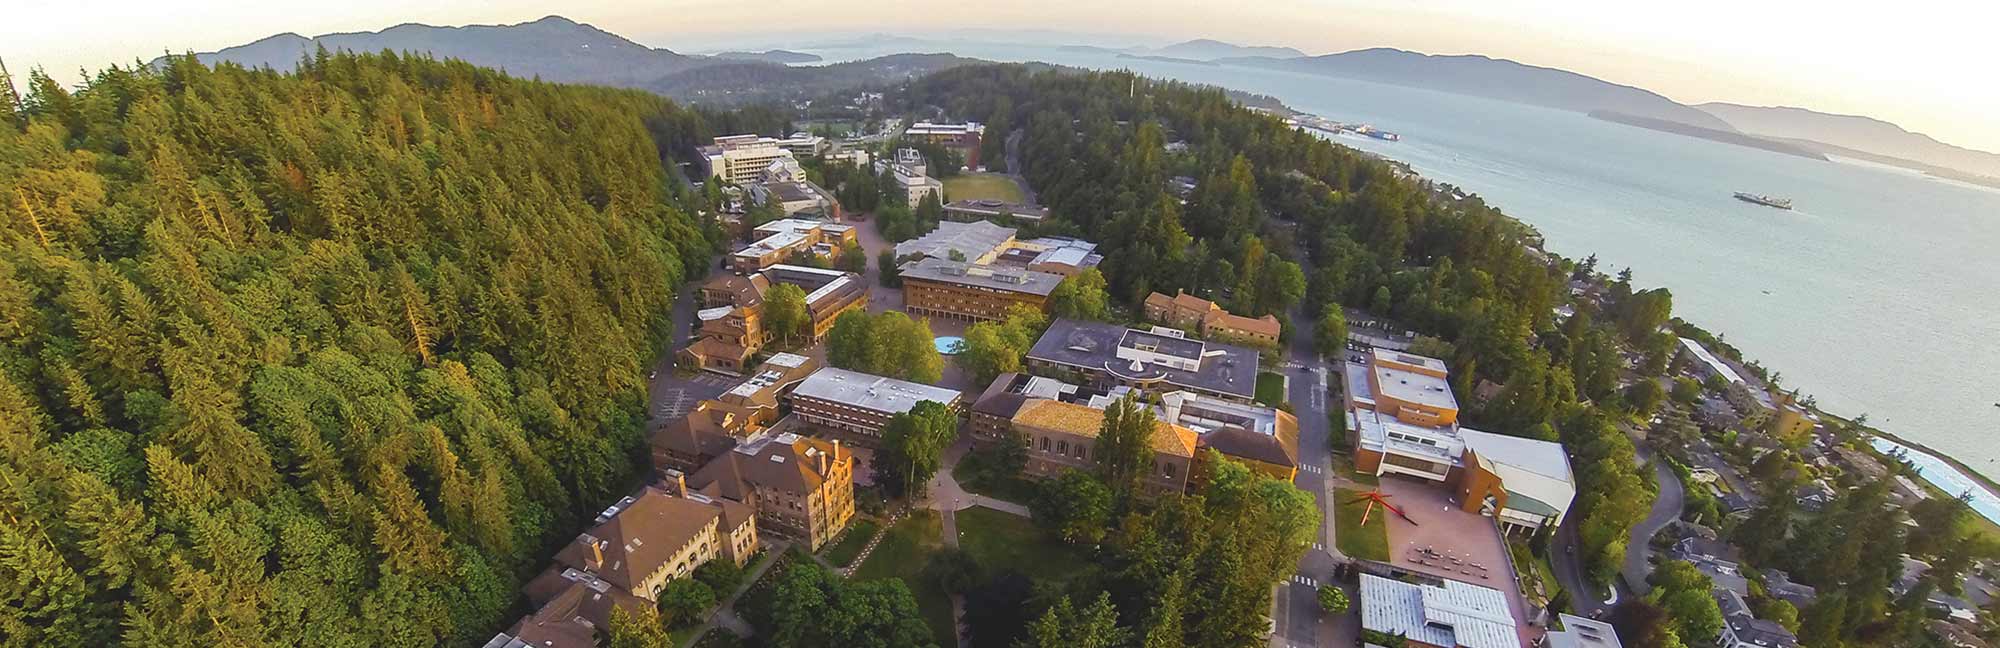 aerial view of Western's campus, the forest of Sehome Hill, and Bellingham Bay with islands visible